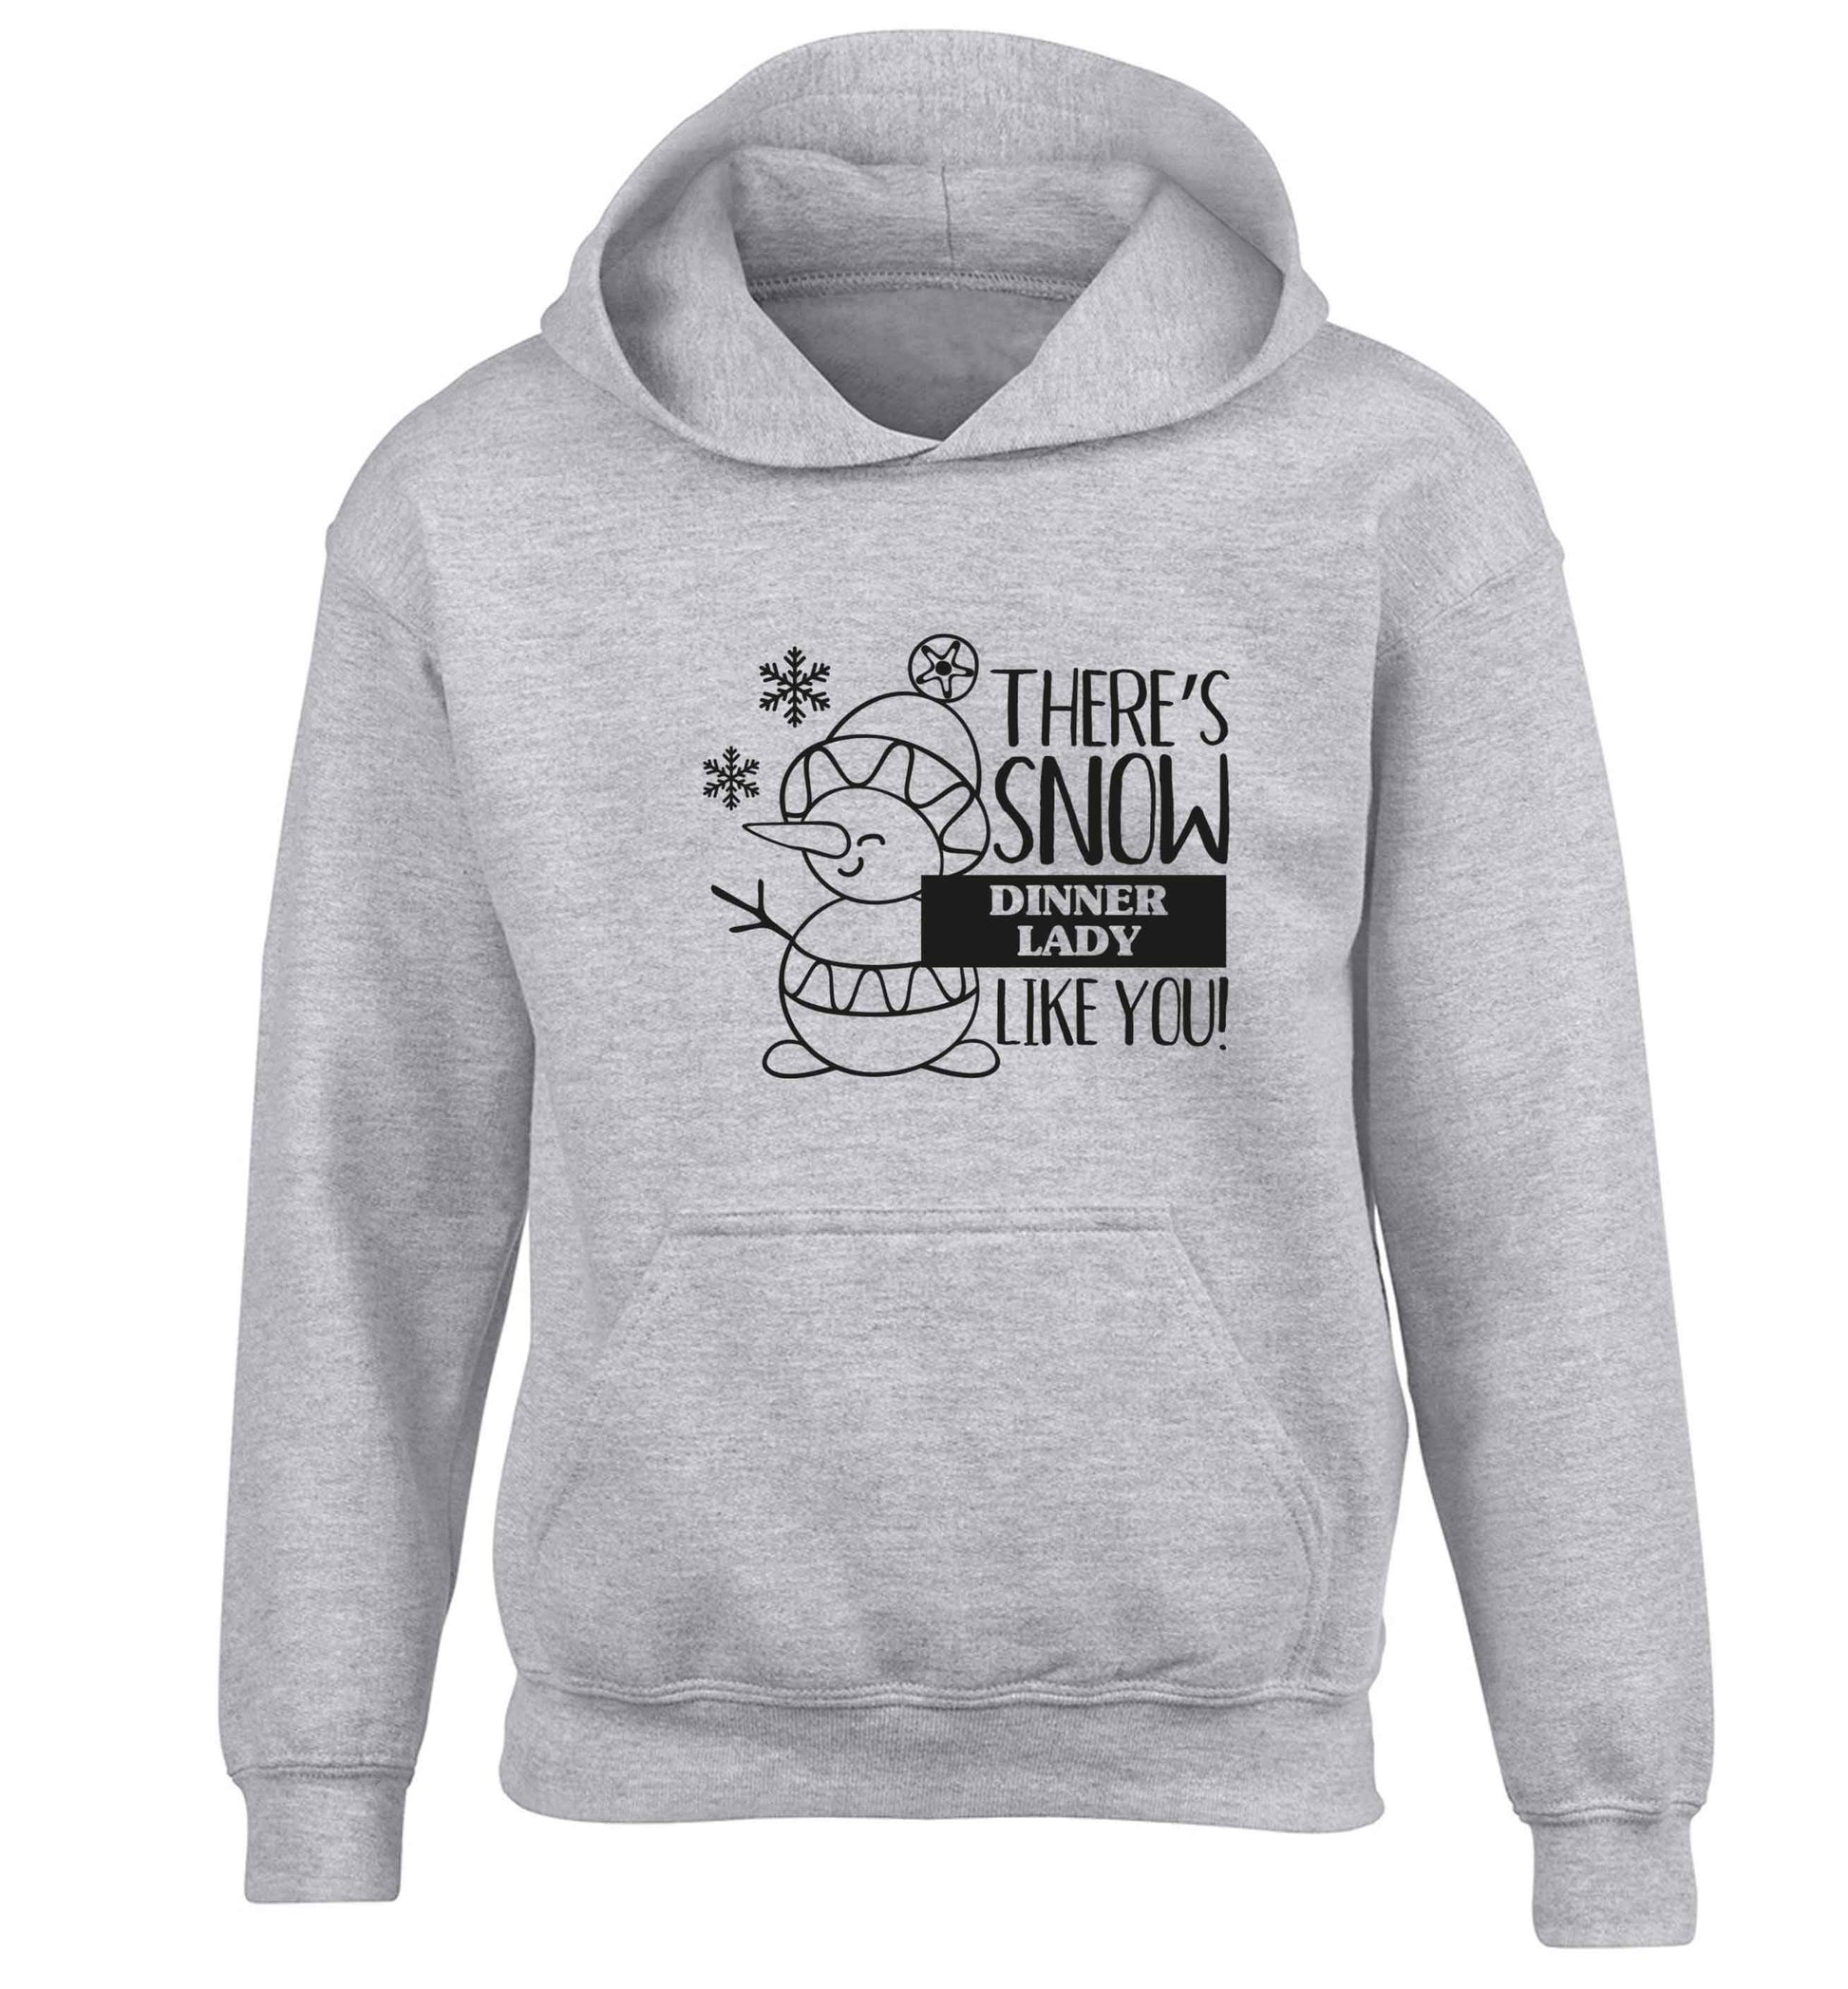 There's snow dinner lady like you children's grey hoodie 12-13 Years